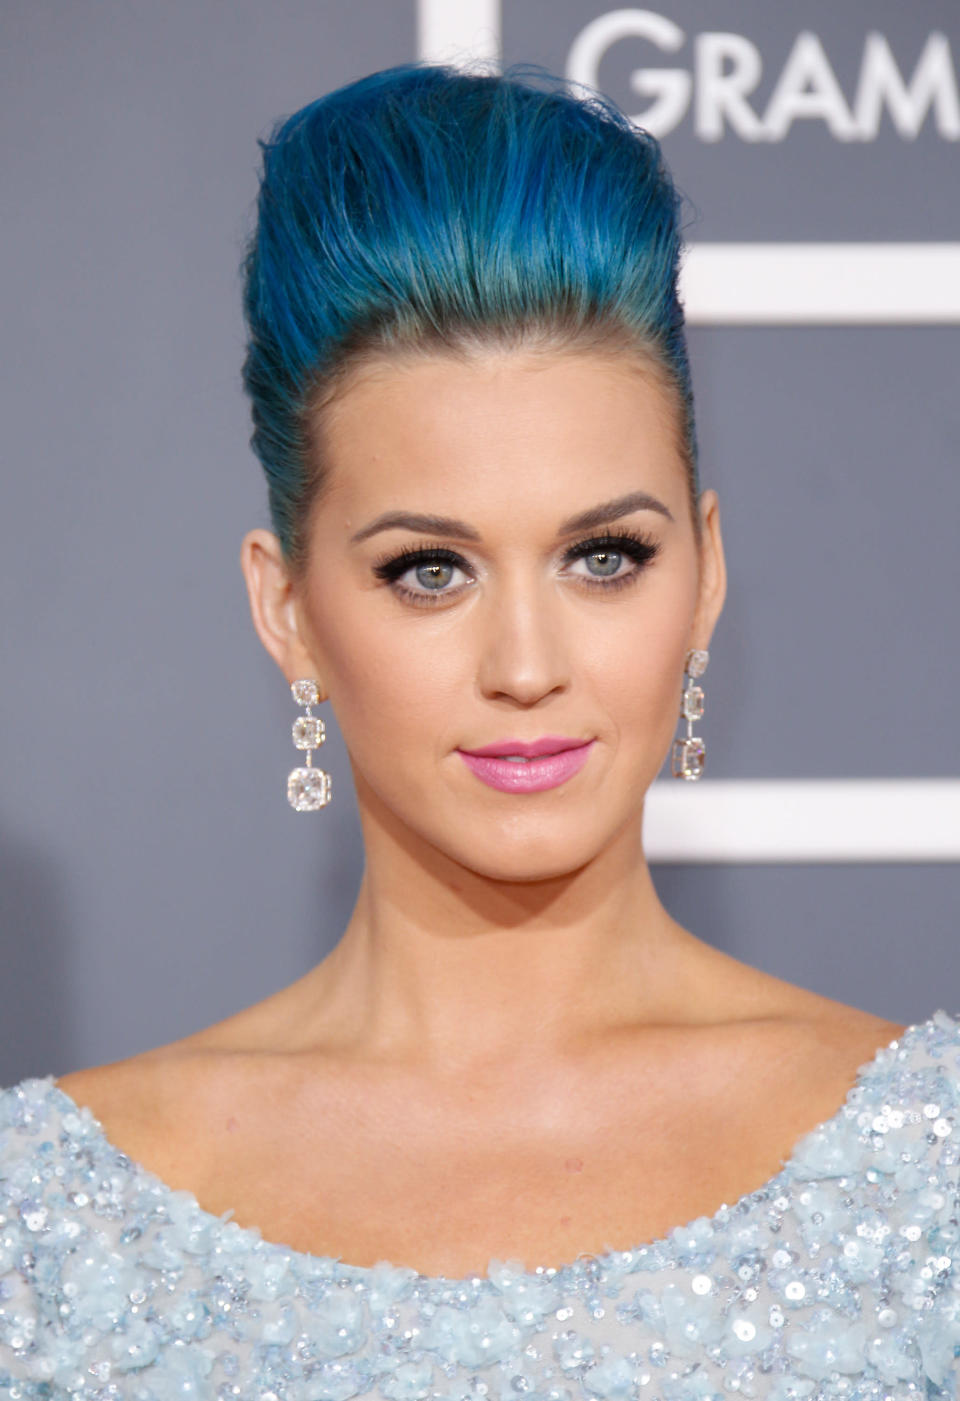 Singer Katy Perry proved blue hair can still be glamorous when she arrived at the 54th Annual GRAMMY Awards held at the Staples Center on February 12, 2012 in Los Angeles, California. (Photo by Dan MacMedan/WireImage)